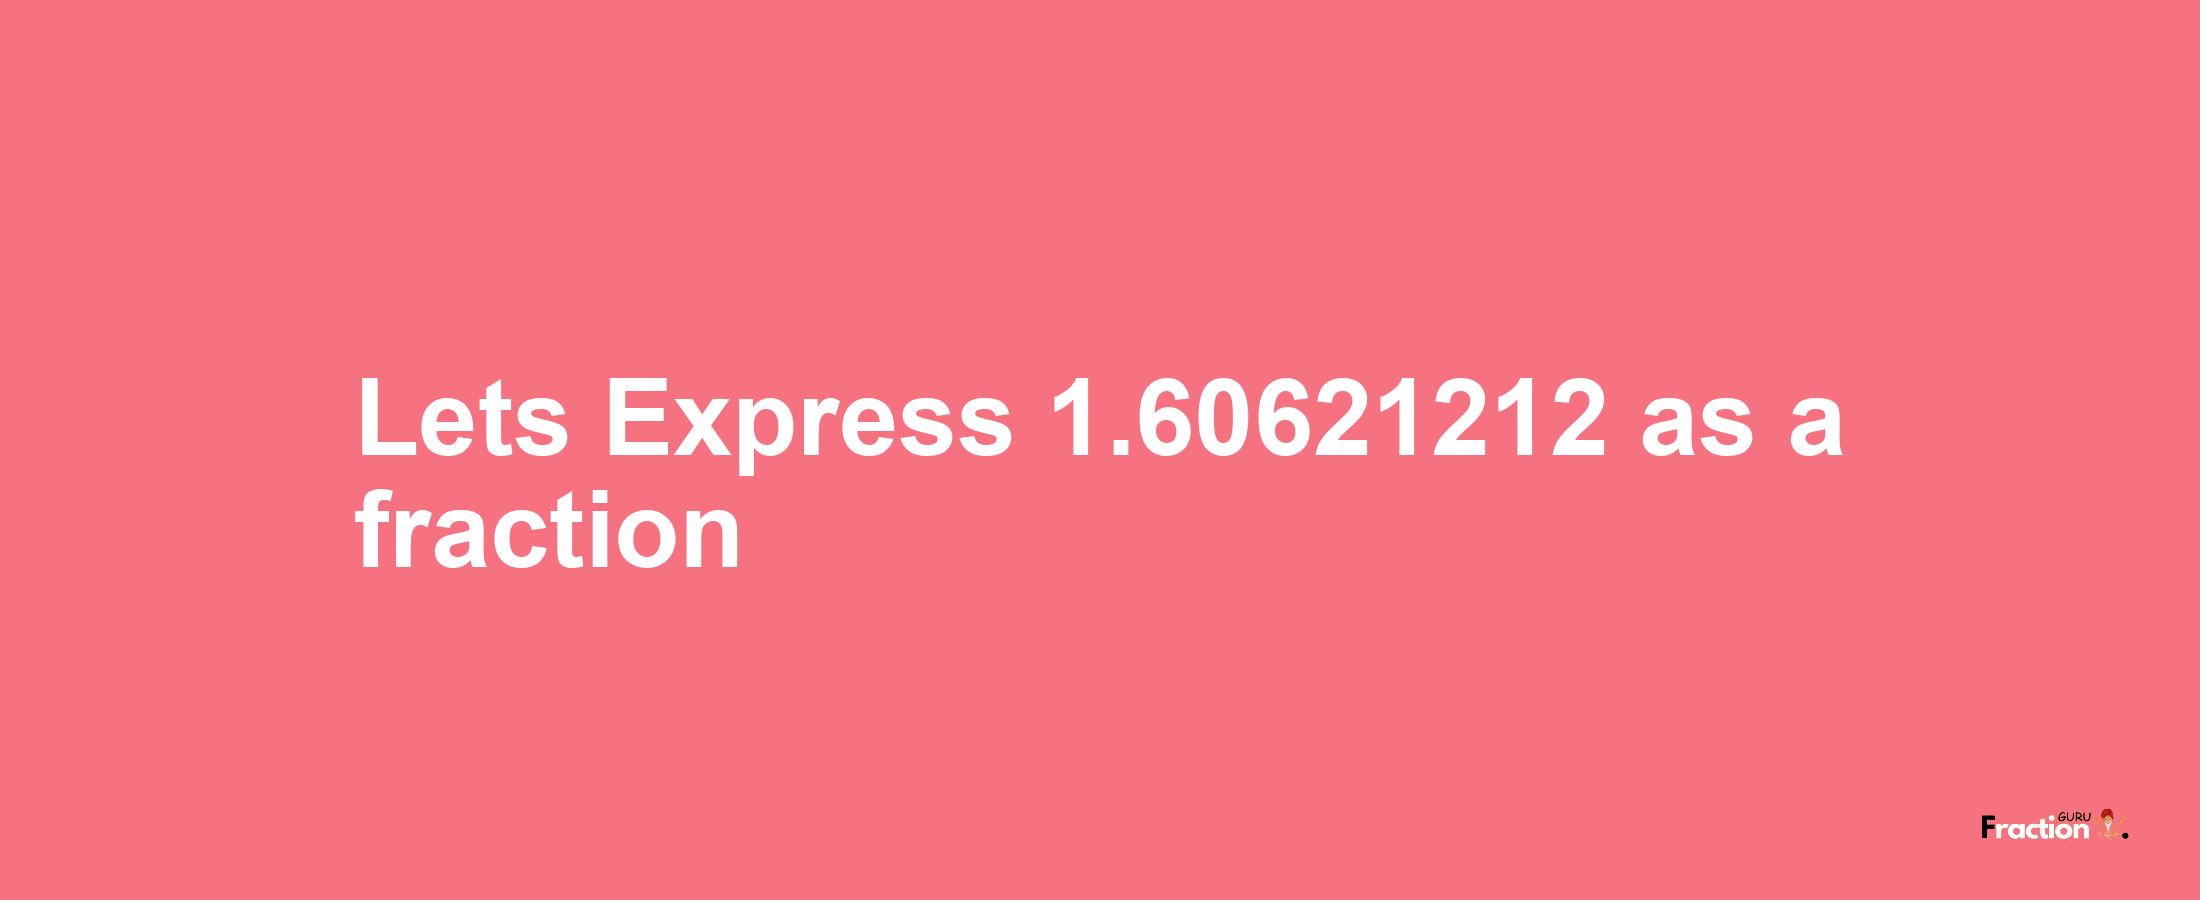 Lets Express 1.60621212 as afraction